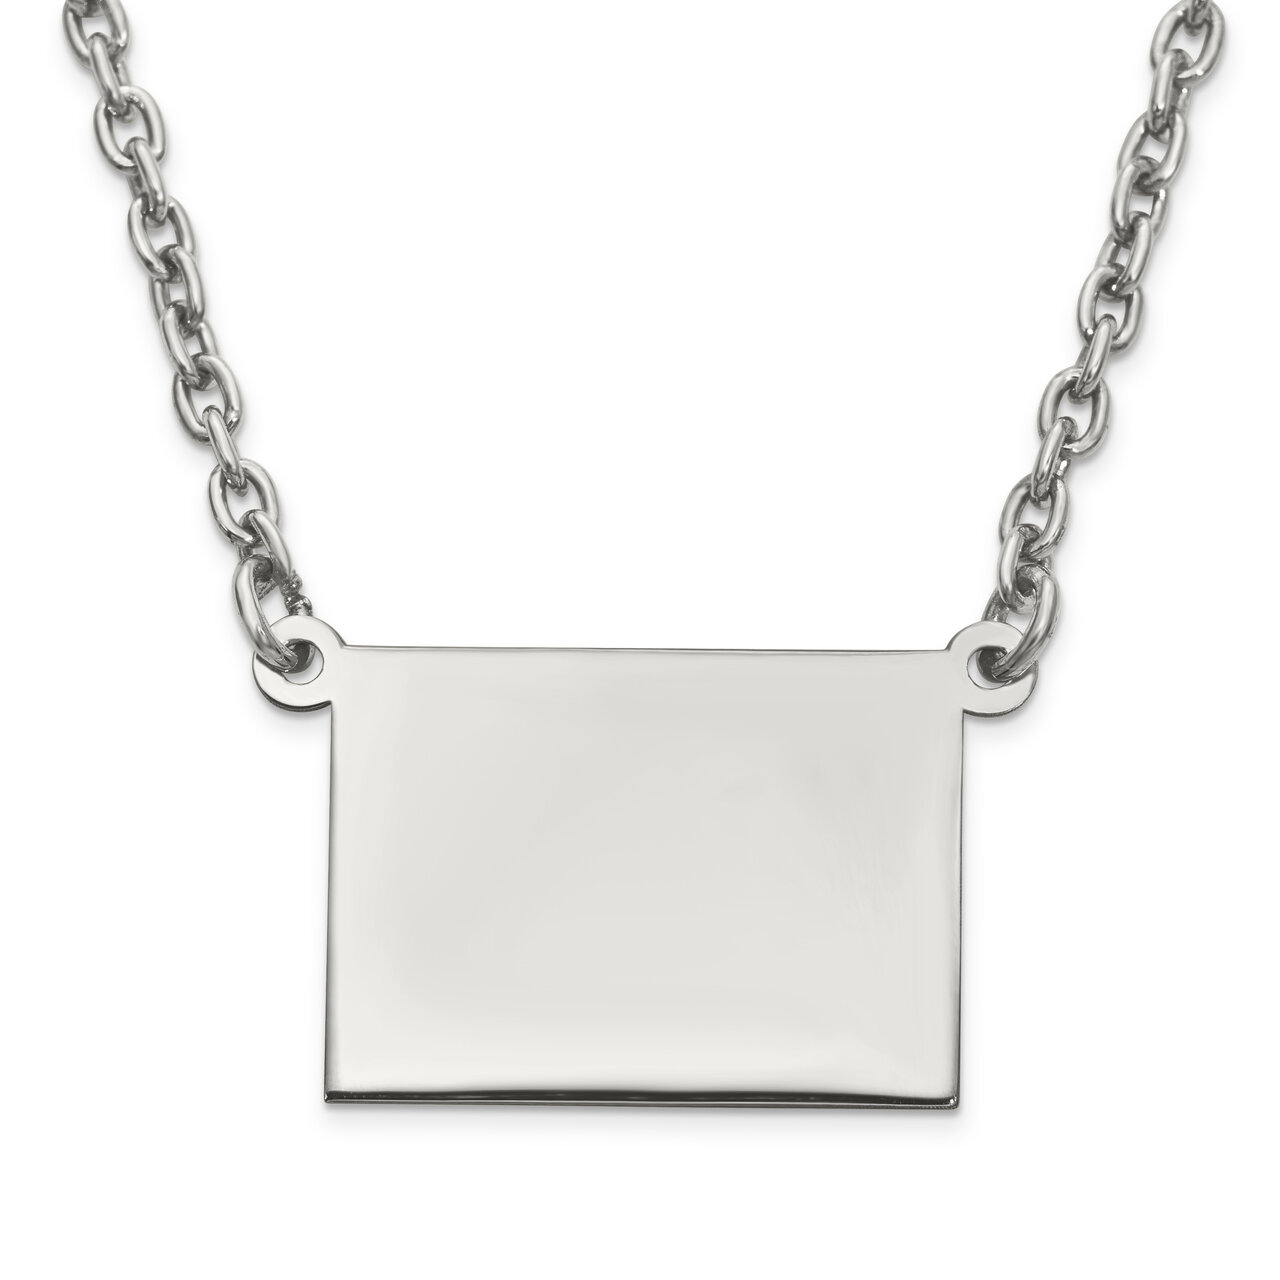 Wyoming State Pendant Necklace with Chain 14k White Gold Engravable XNA706W-WY